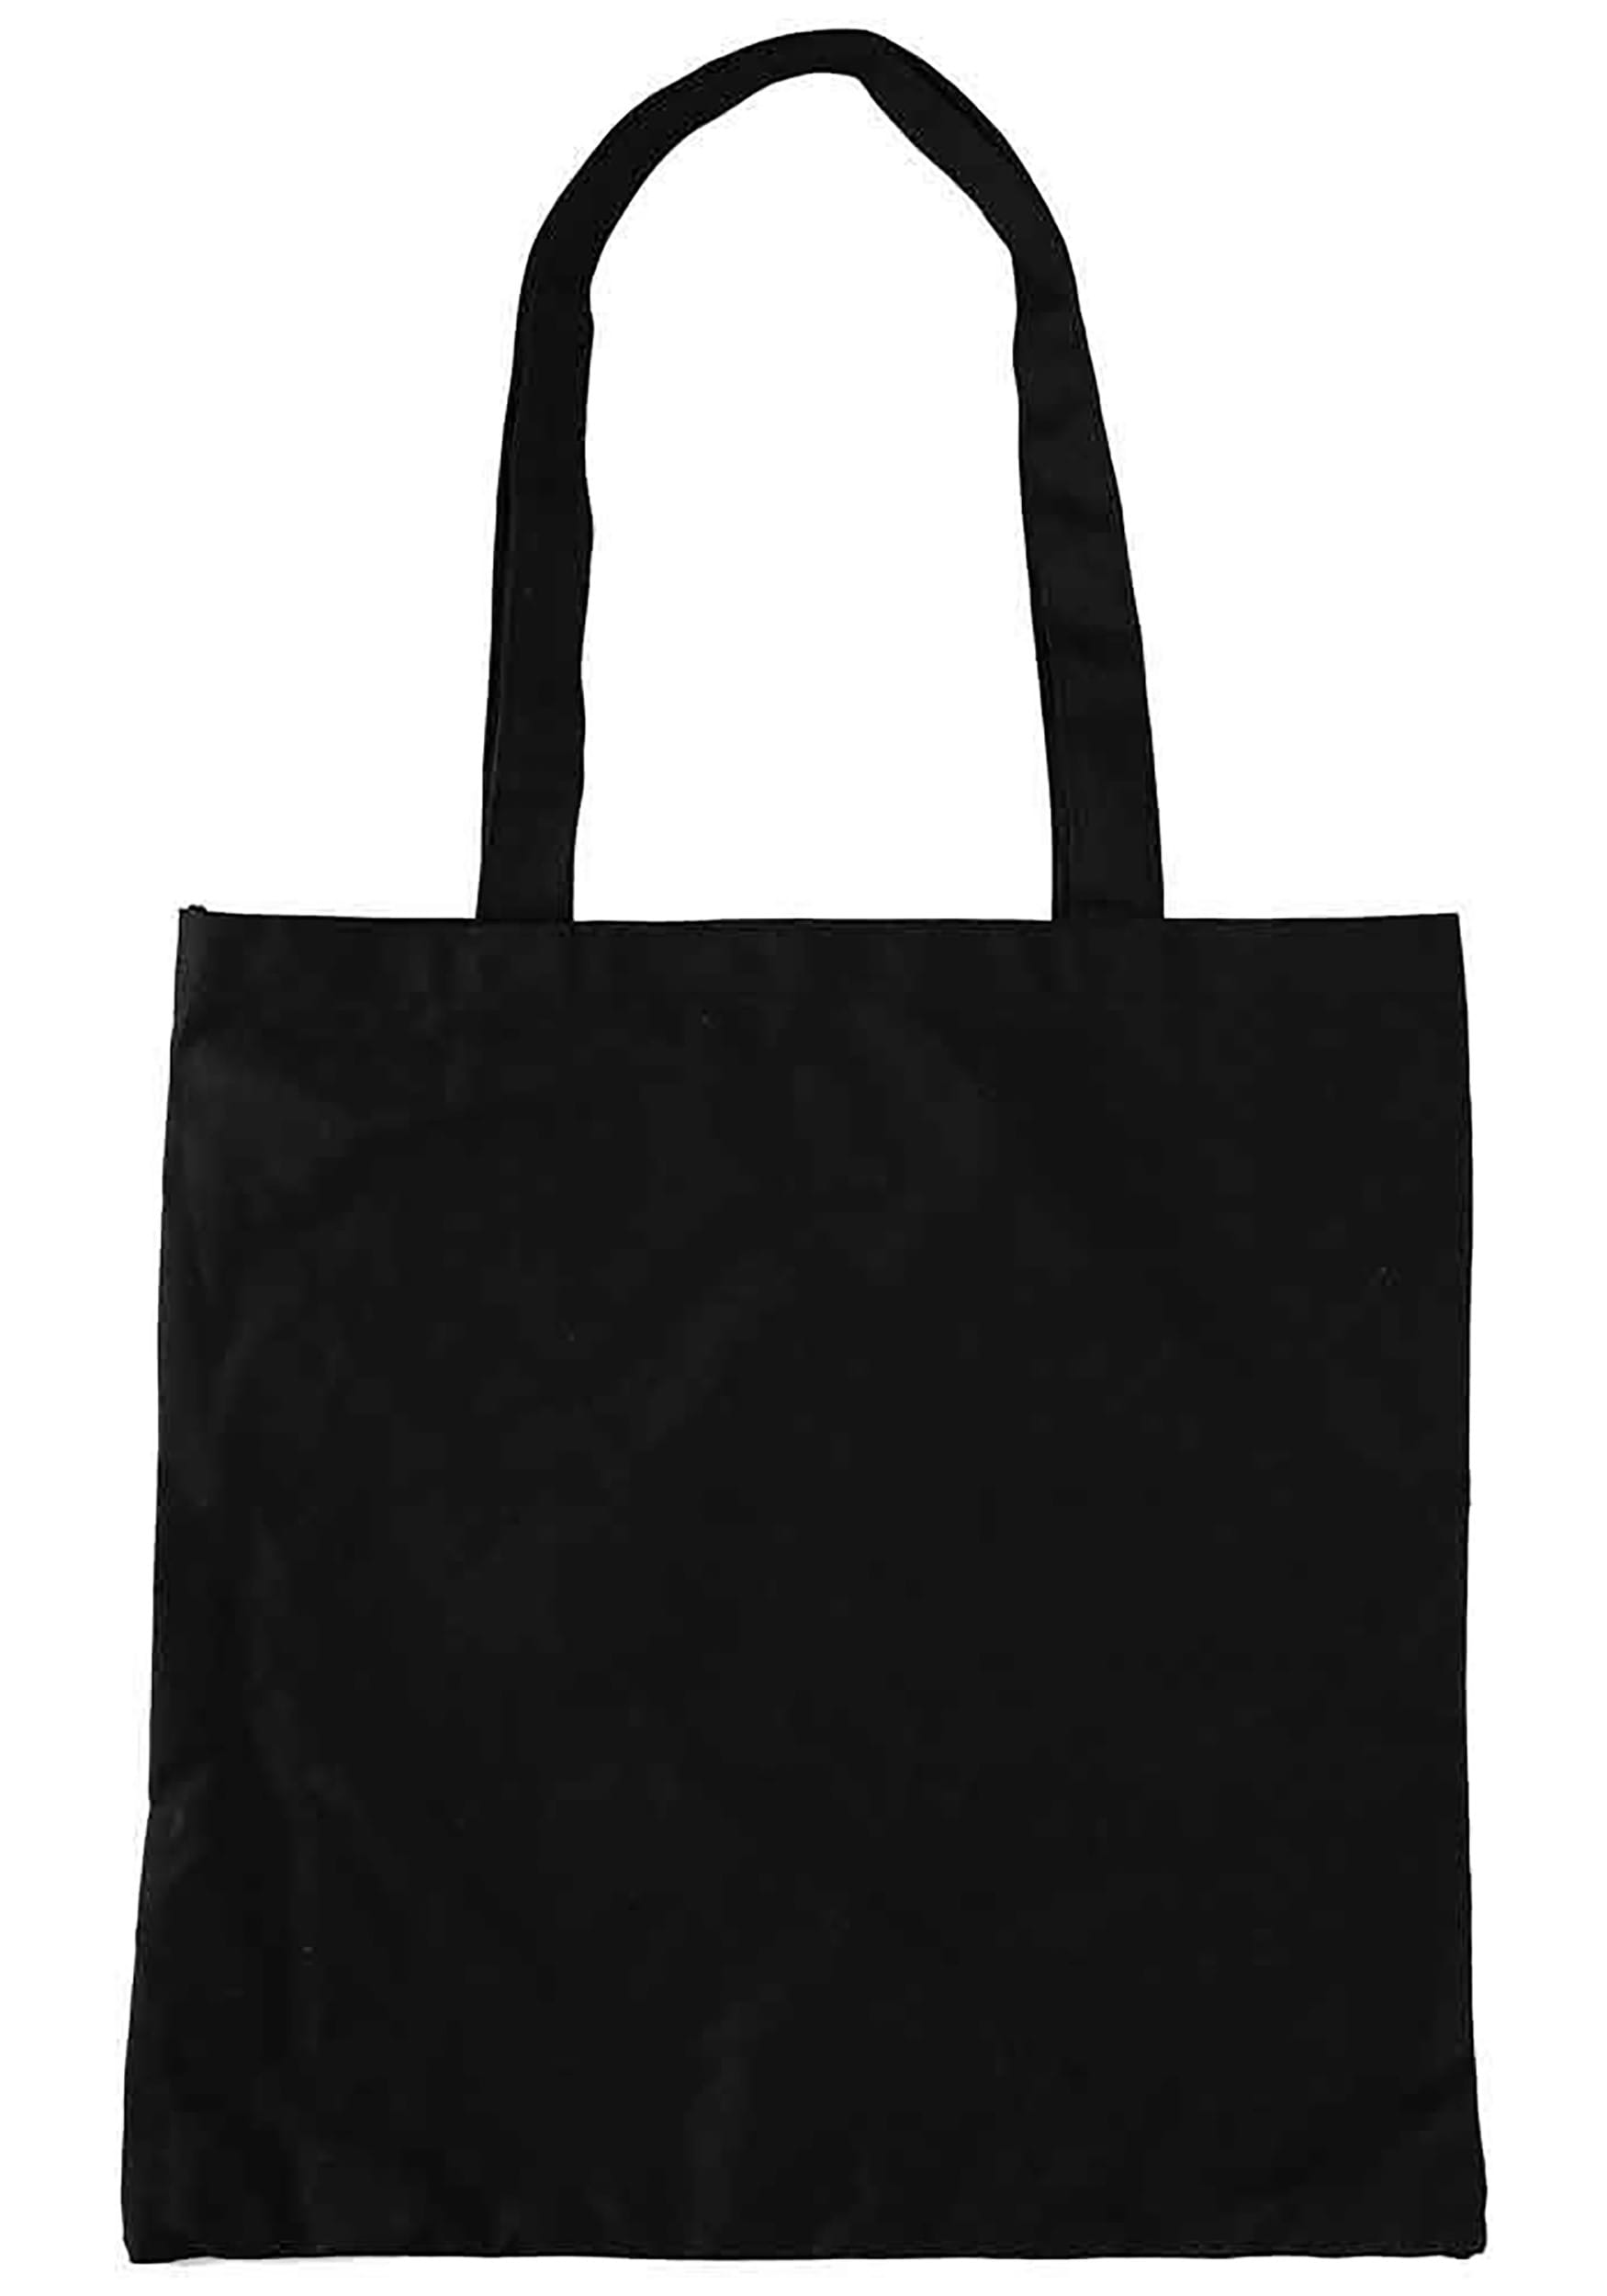 Ghostface Green Drip Canvas Tote